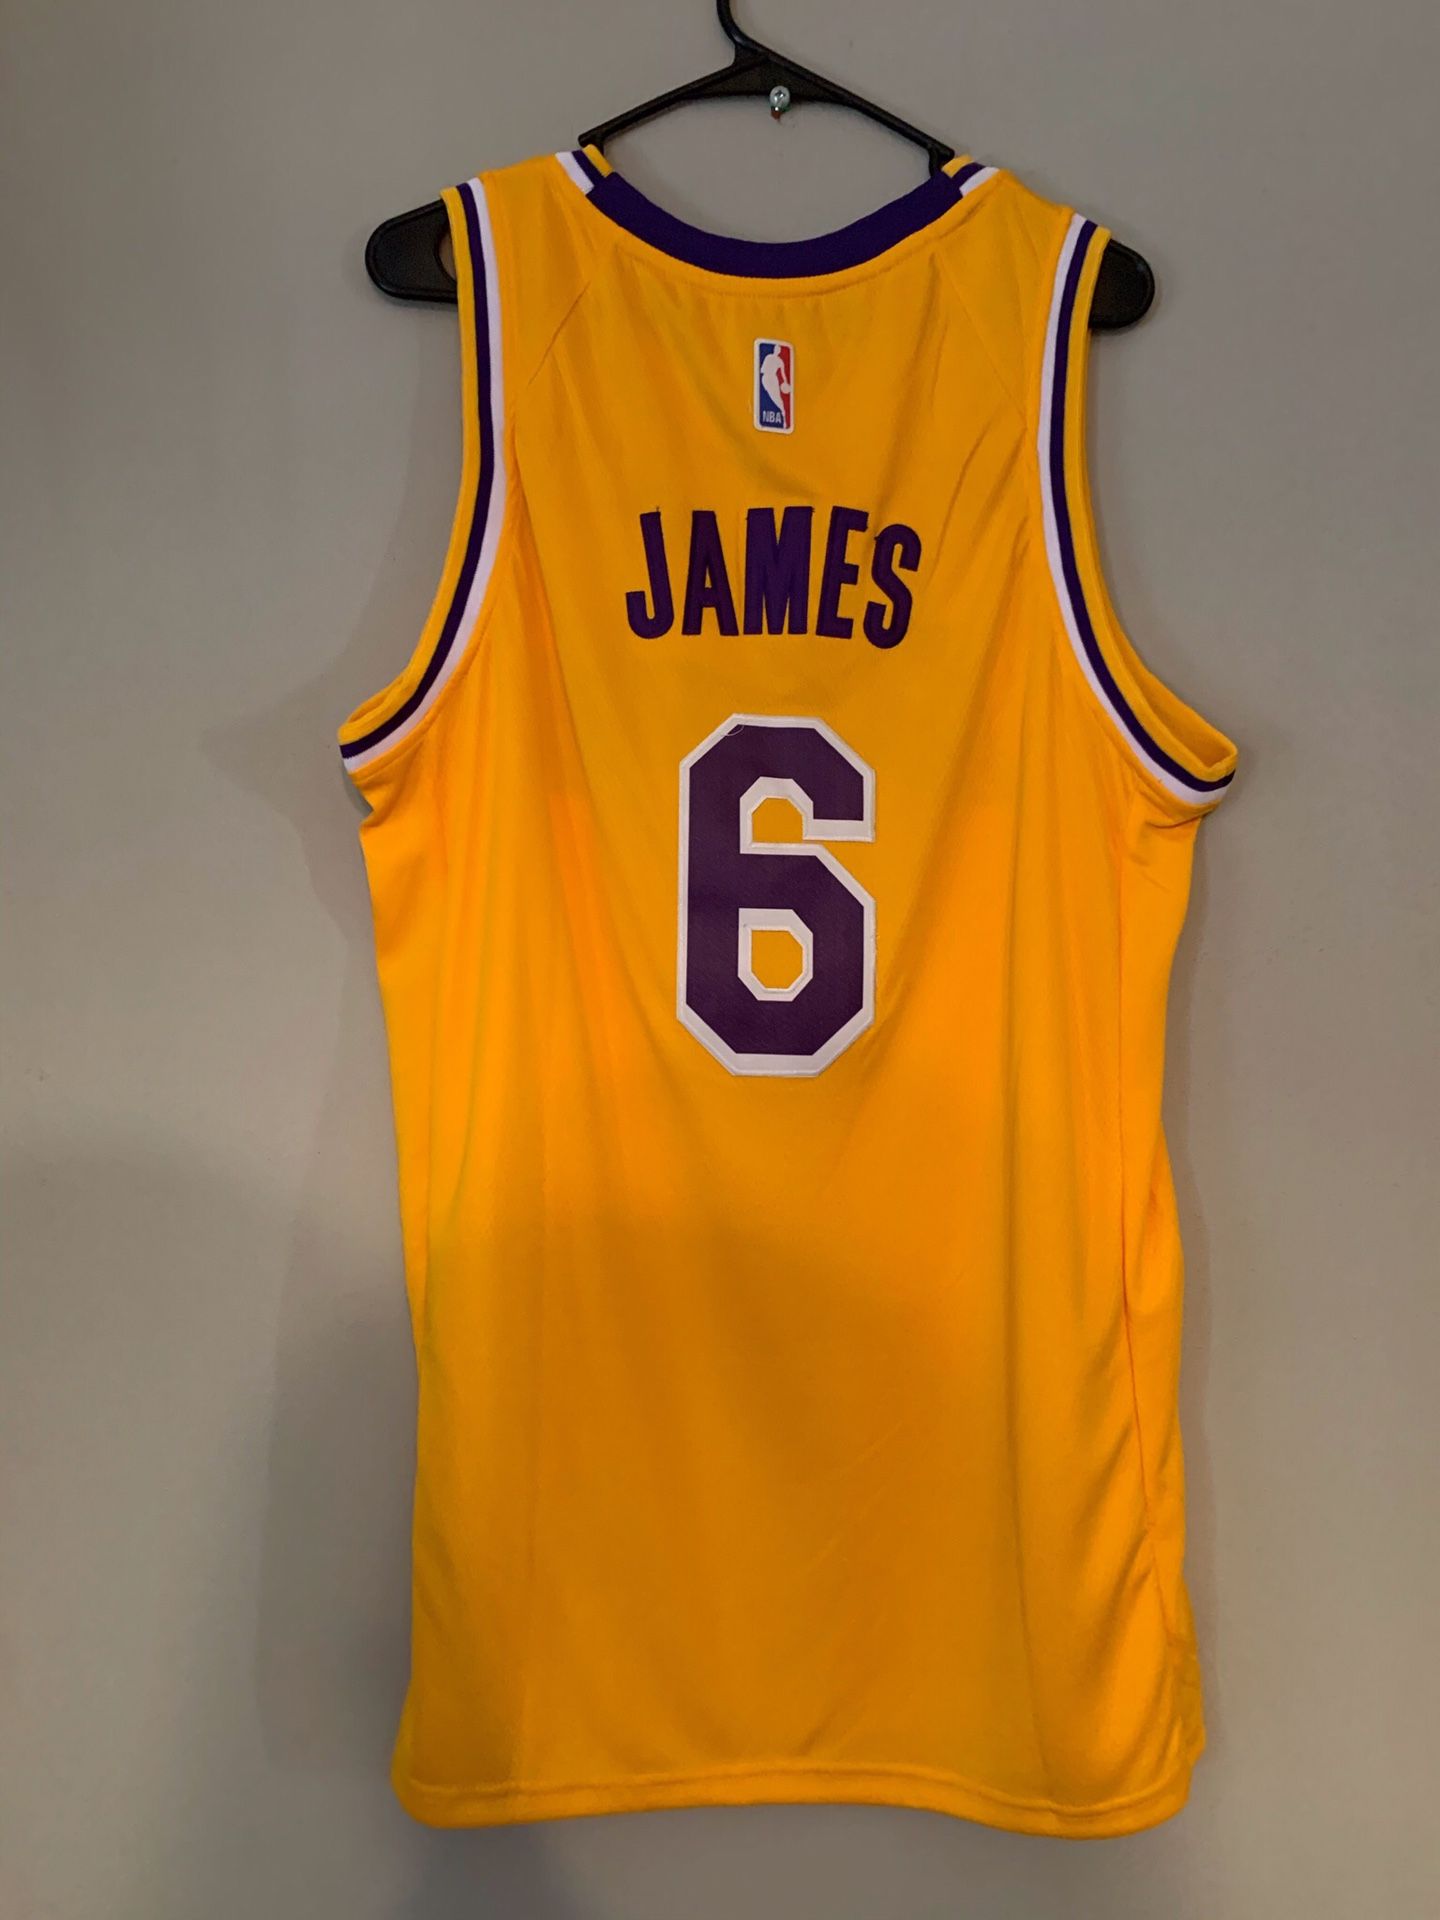 LEBRON JAMES LOS ANGELES LAKERS NIKE JERSEY BRAND NEW WITH TAGS SIZES LARGE AND XL AVAILABLE